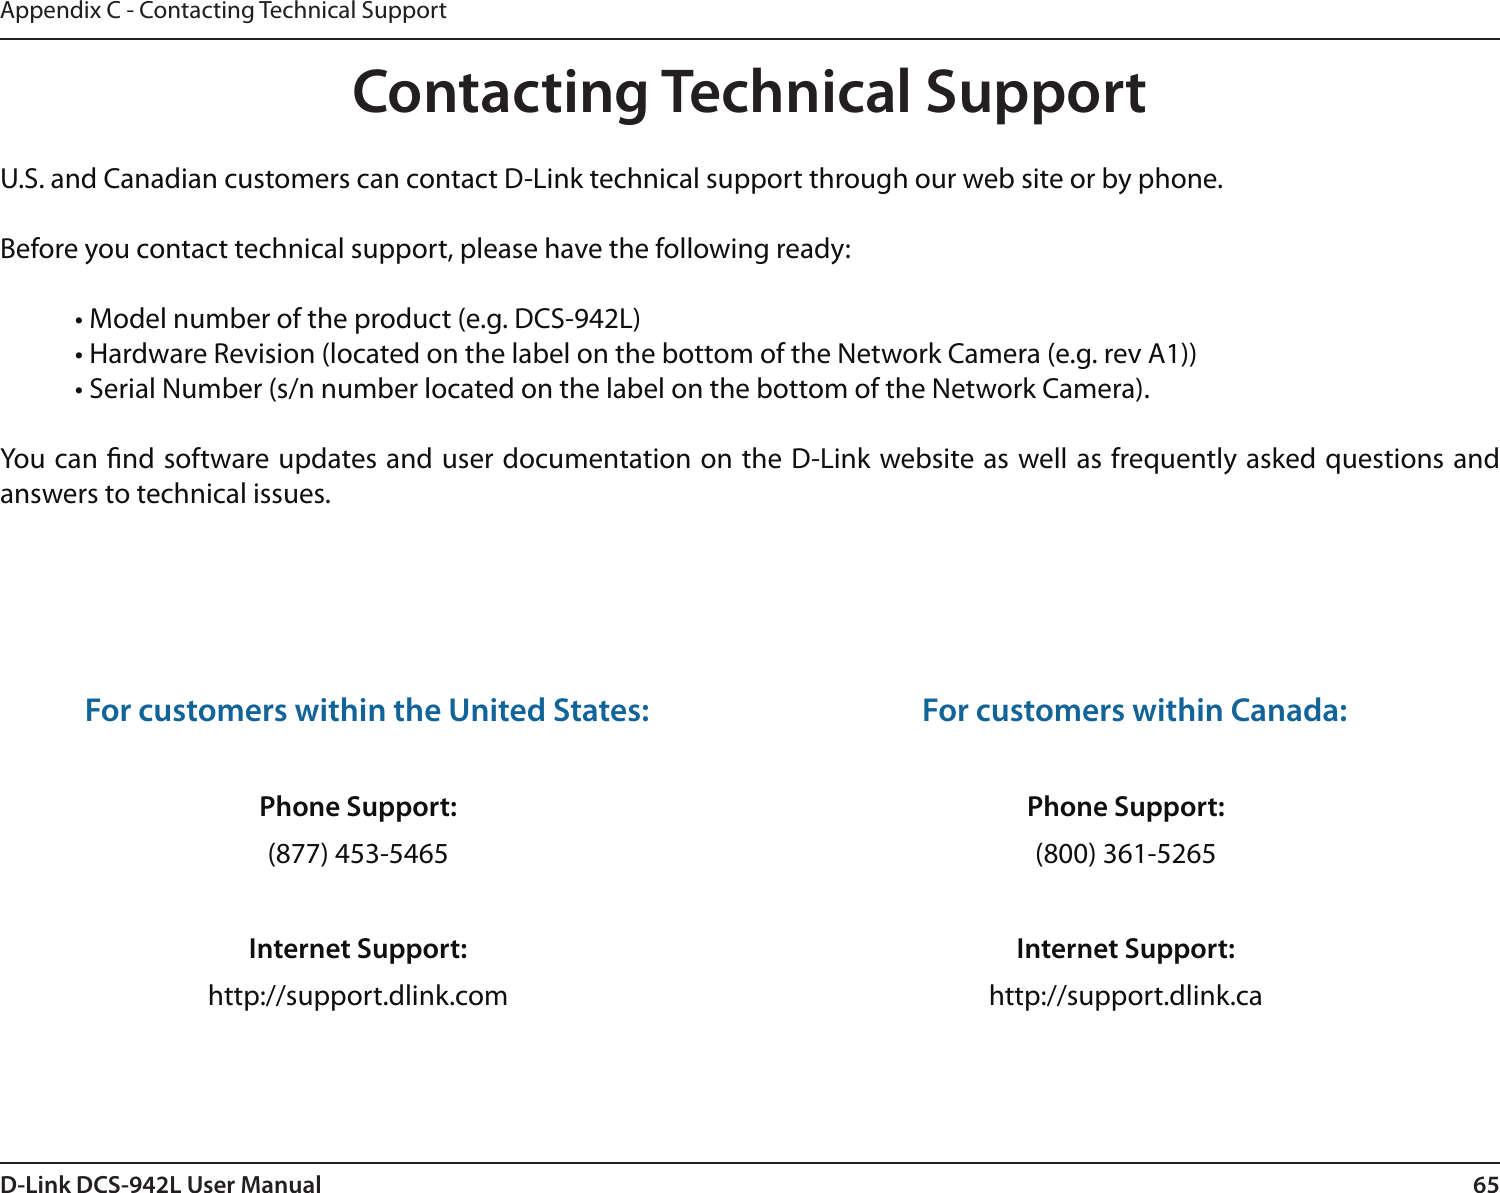 65D-Link DCS-942L User ManualAppendix C - Contacting Technical SupportContacting Technical SupportU.S. and Canadian customers can contact D-Link technical support through our web site or by phone.Before you contact technical support, please have the following ready:  • Model number of the product (e.g. DCS-942L)  • Hardware Revision (located on the label on the bottom of the Network Camera (e.g. rev A1))  • Serial Number (s/n number located on the label on the bottom of the Network Camera). You can nd software updates and user documentation on the D-Link website as well as frequently asked questions and answers to technical issues.For customers within the United States: Phone Support:(877) 453-5465Internet Support:http://support.dlink.com For customers within Canada: Phone Support:(800) 361-5265 Internet Support:http://support.dlink.ca 